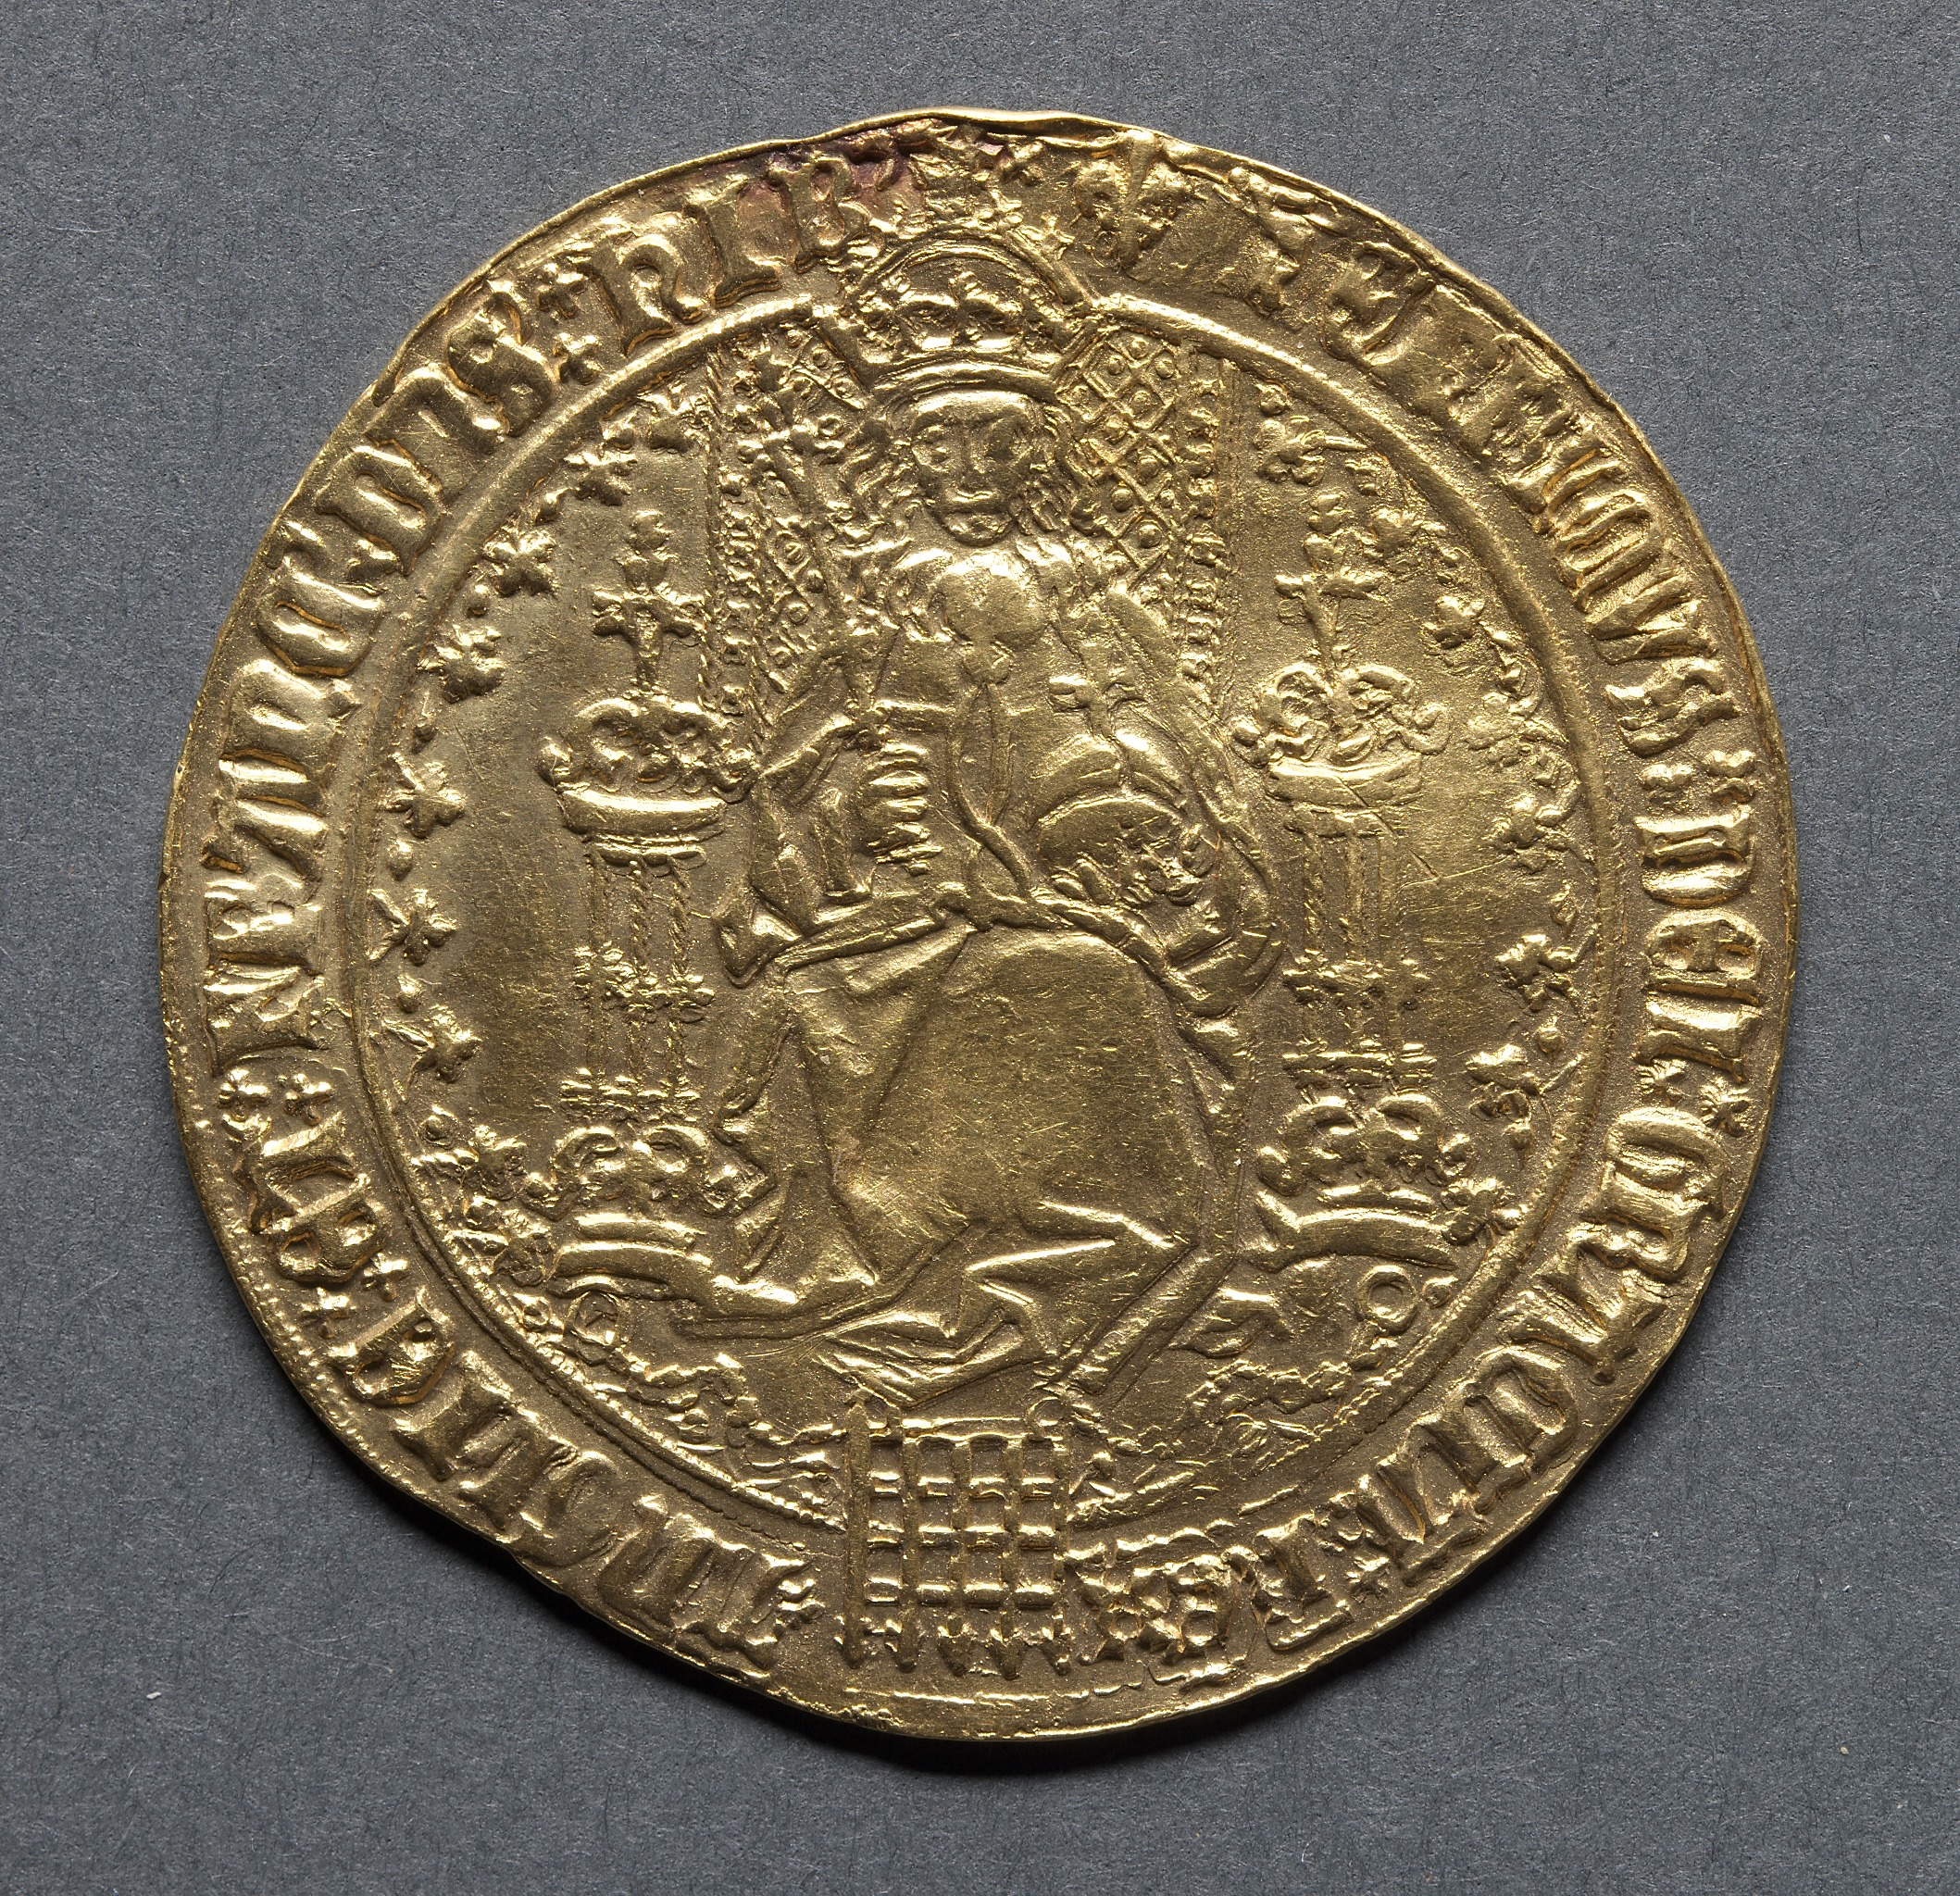 Sovereign: Henry VIII Enthroned (obverse)